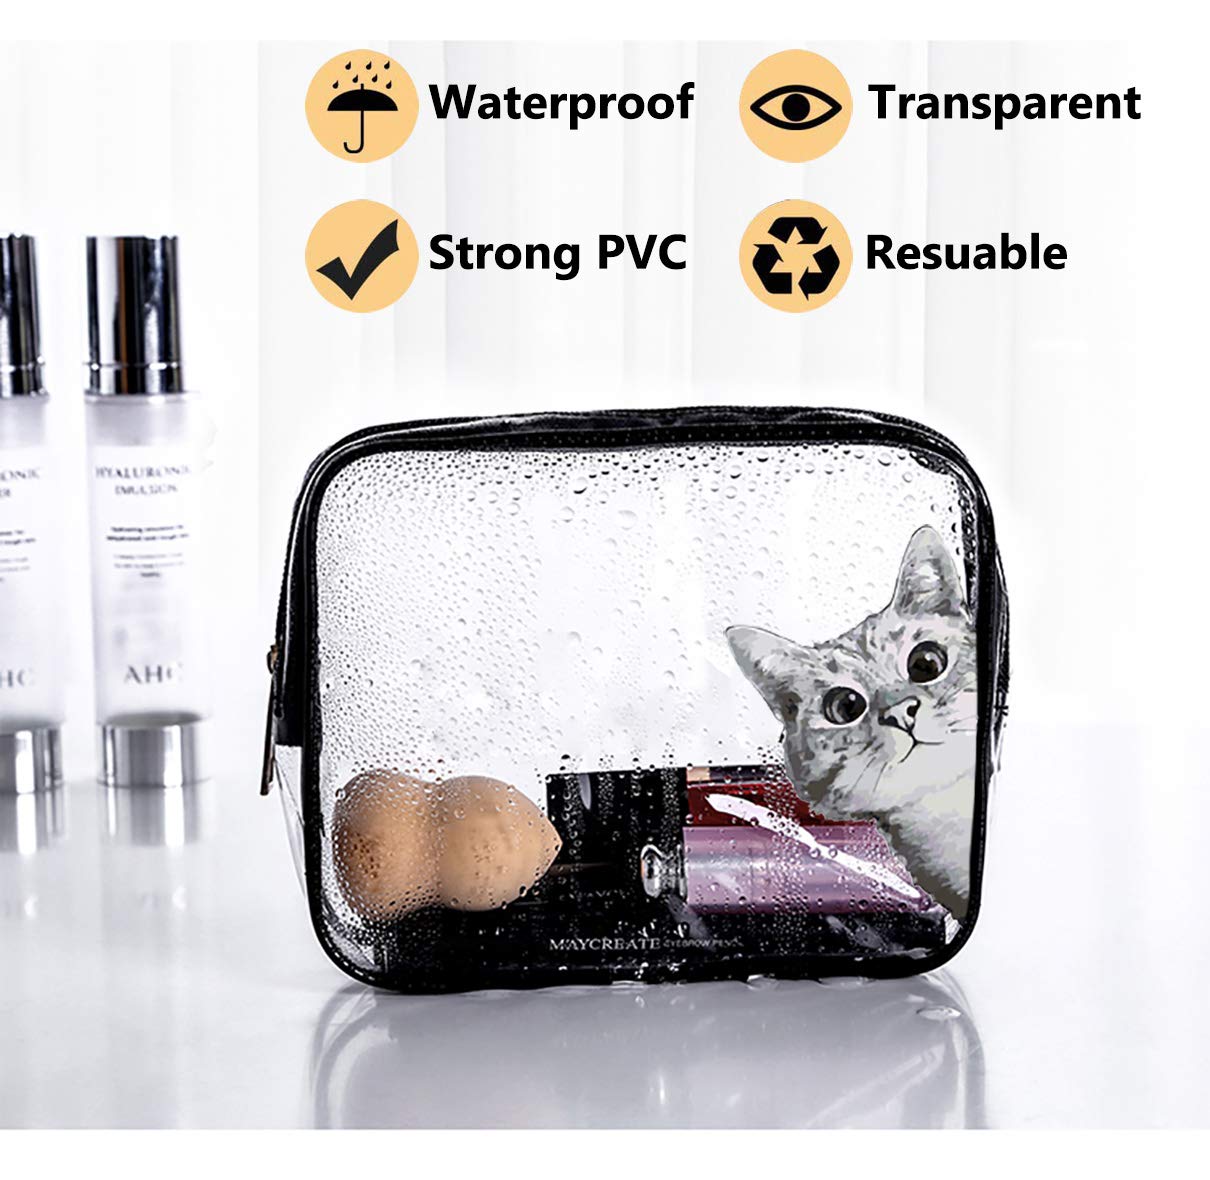 Toiletry Bags Makeup Bags & Cases Waterproof Plastic Bag Clear PVC Travel Bag Brushes Organizer for Men and Women Travel Business Bathroom (transparent)